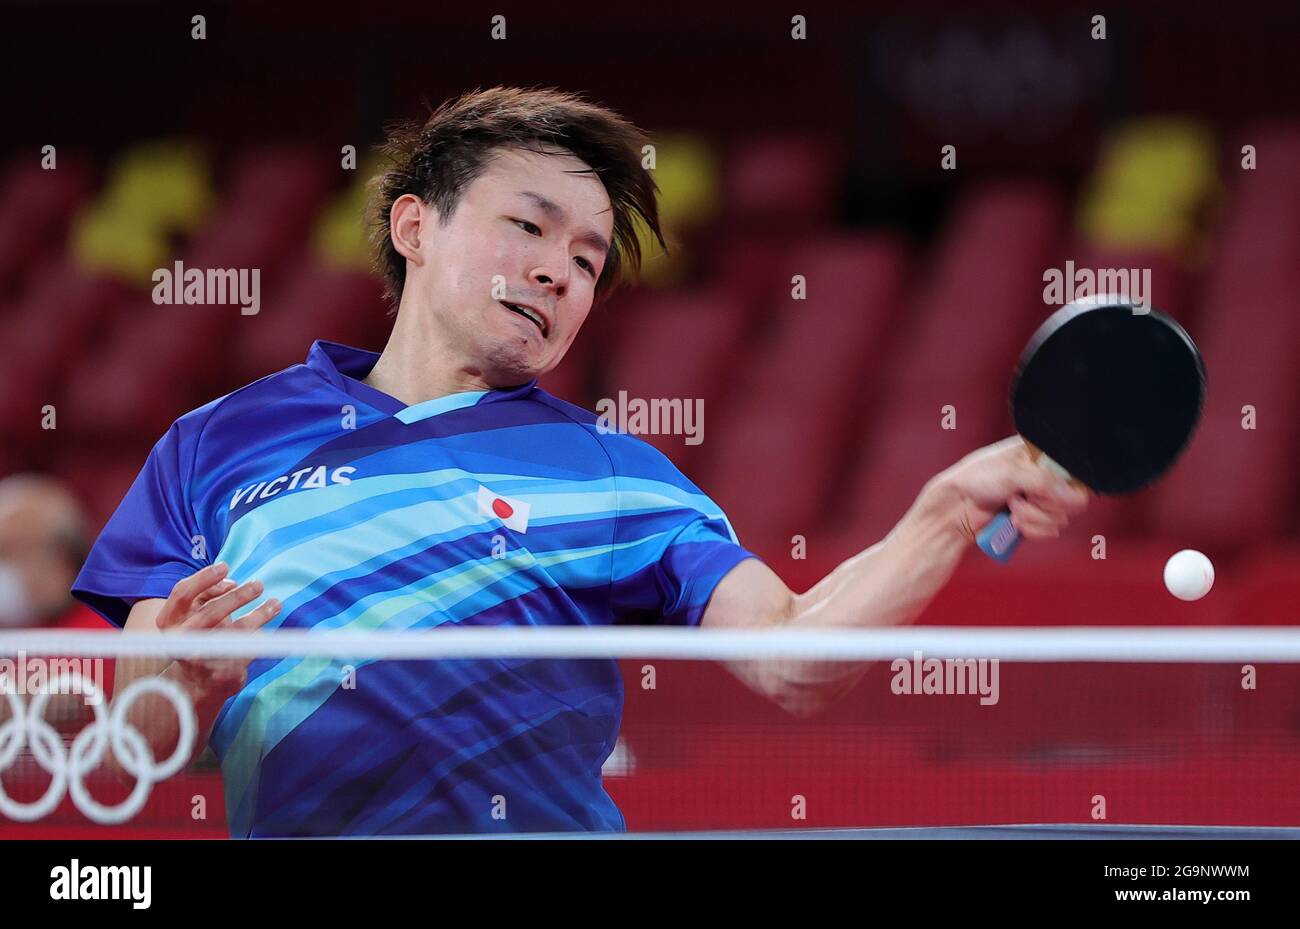 Tokyo, Japan. 27th July, 2021. Koki Niwa of Japan competes during the table tennis men's singles round of 16 match against Dimitrij Ovtcharov of Germany at the Tokyo 2020 Olympic Games in Tokyo, Japan, July 27, 2021. Credit: Wang Dongzhen/Xinhua/Alamy Live News Stock Photo